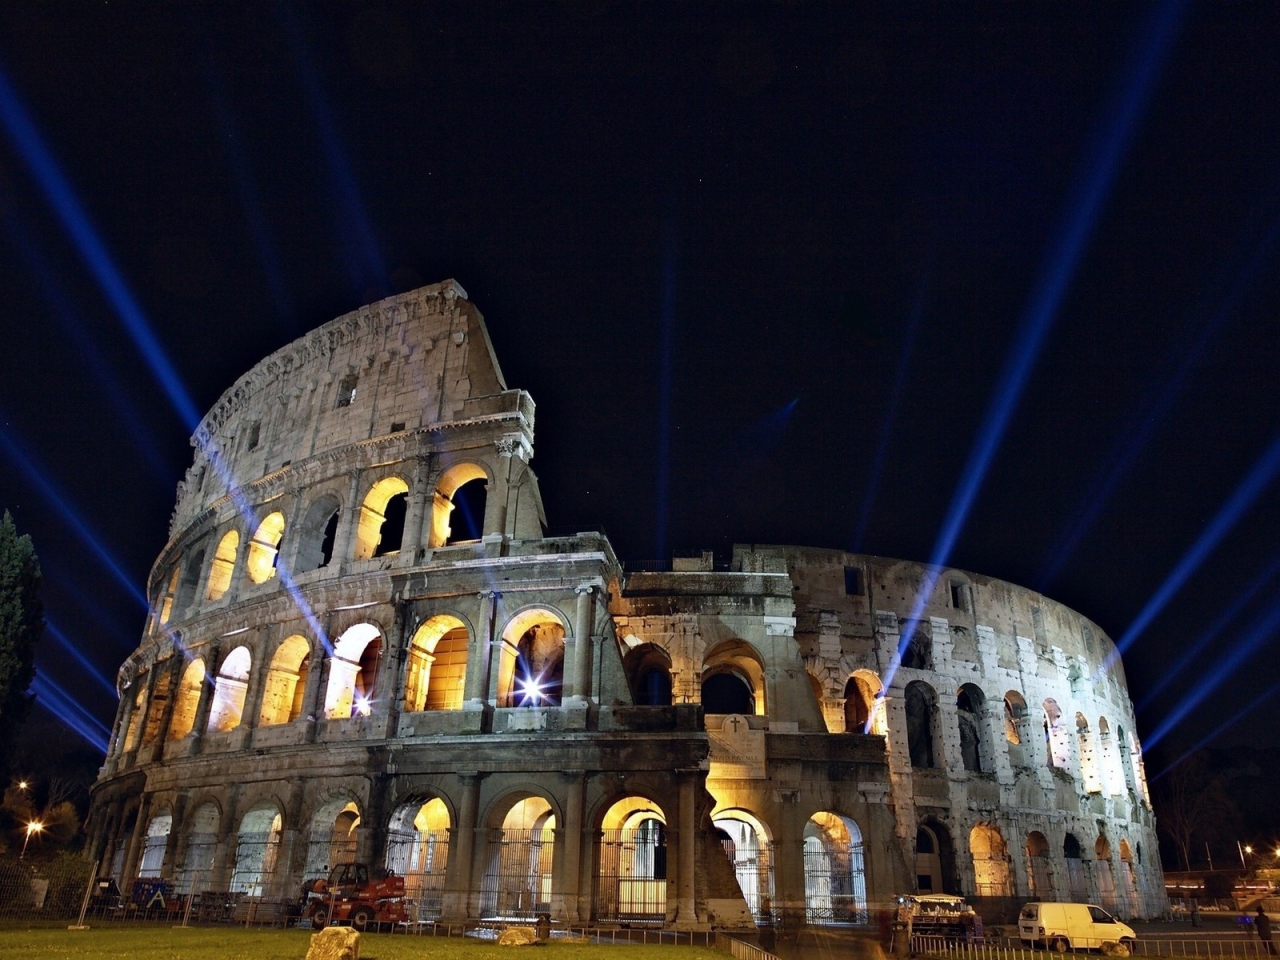 Colloseum during the Night for 1280 x 960 resolution